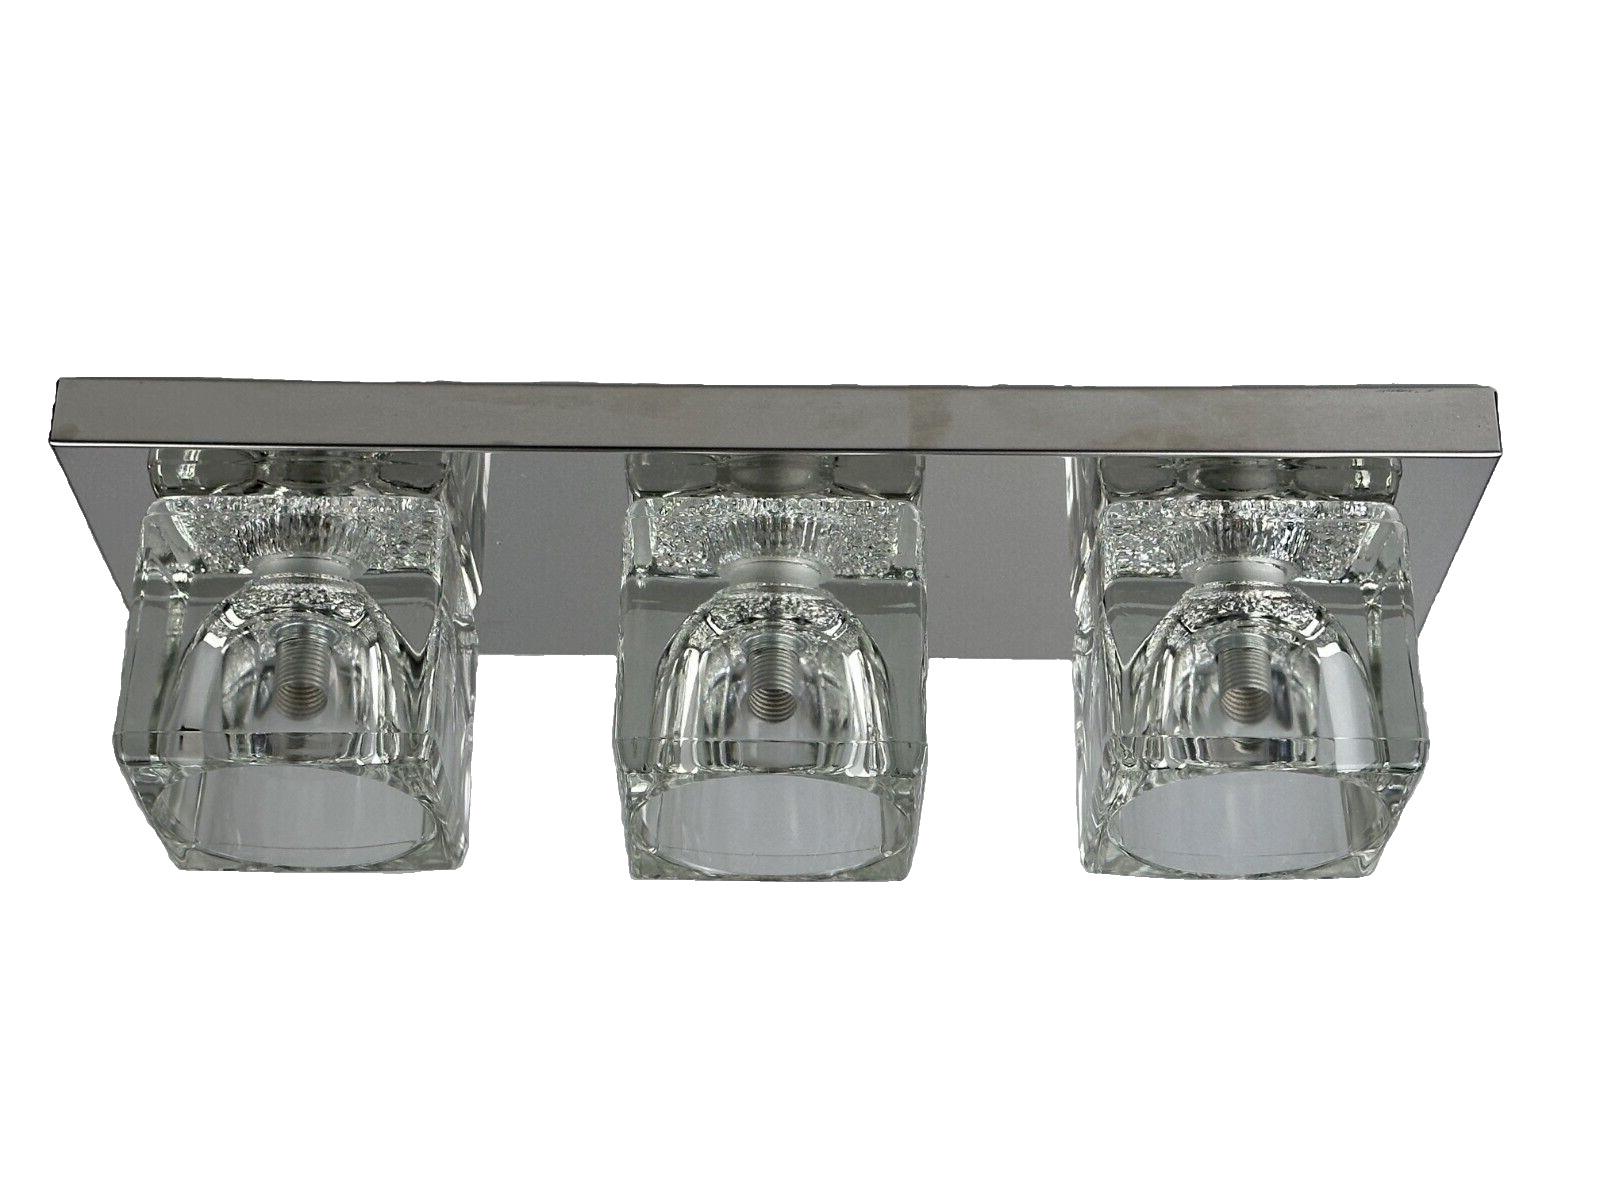 60s 70s Peill & Putzler Cube Wall Lamp Wall Sconce Ice Glass Space Design

Object: wall lamp

Manufacturer: Peill & Putzler

Condition: good - vintage

Age: around 1960-1970

Dimensions:

Width = 46.5cm
Depth = 15.5cm
Height = 13cm

Other notes:

3x